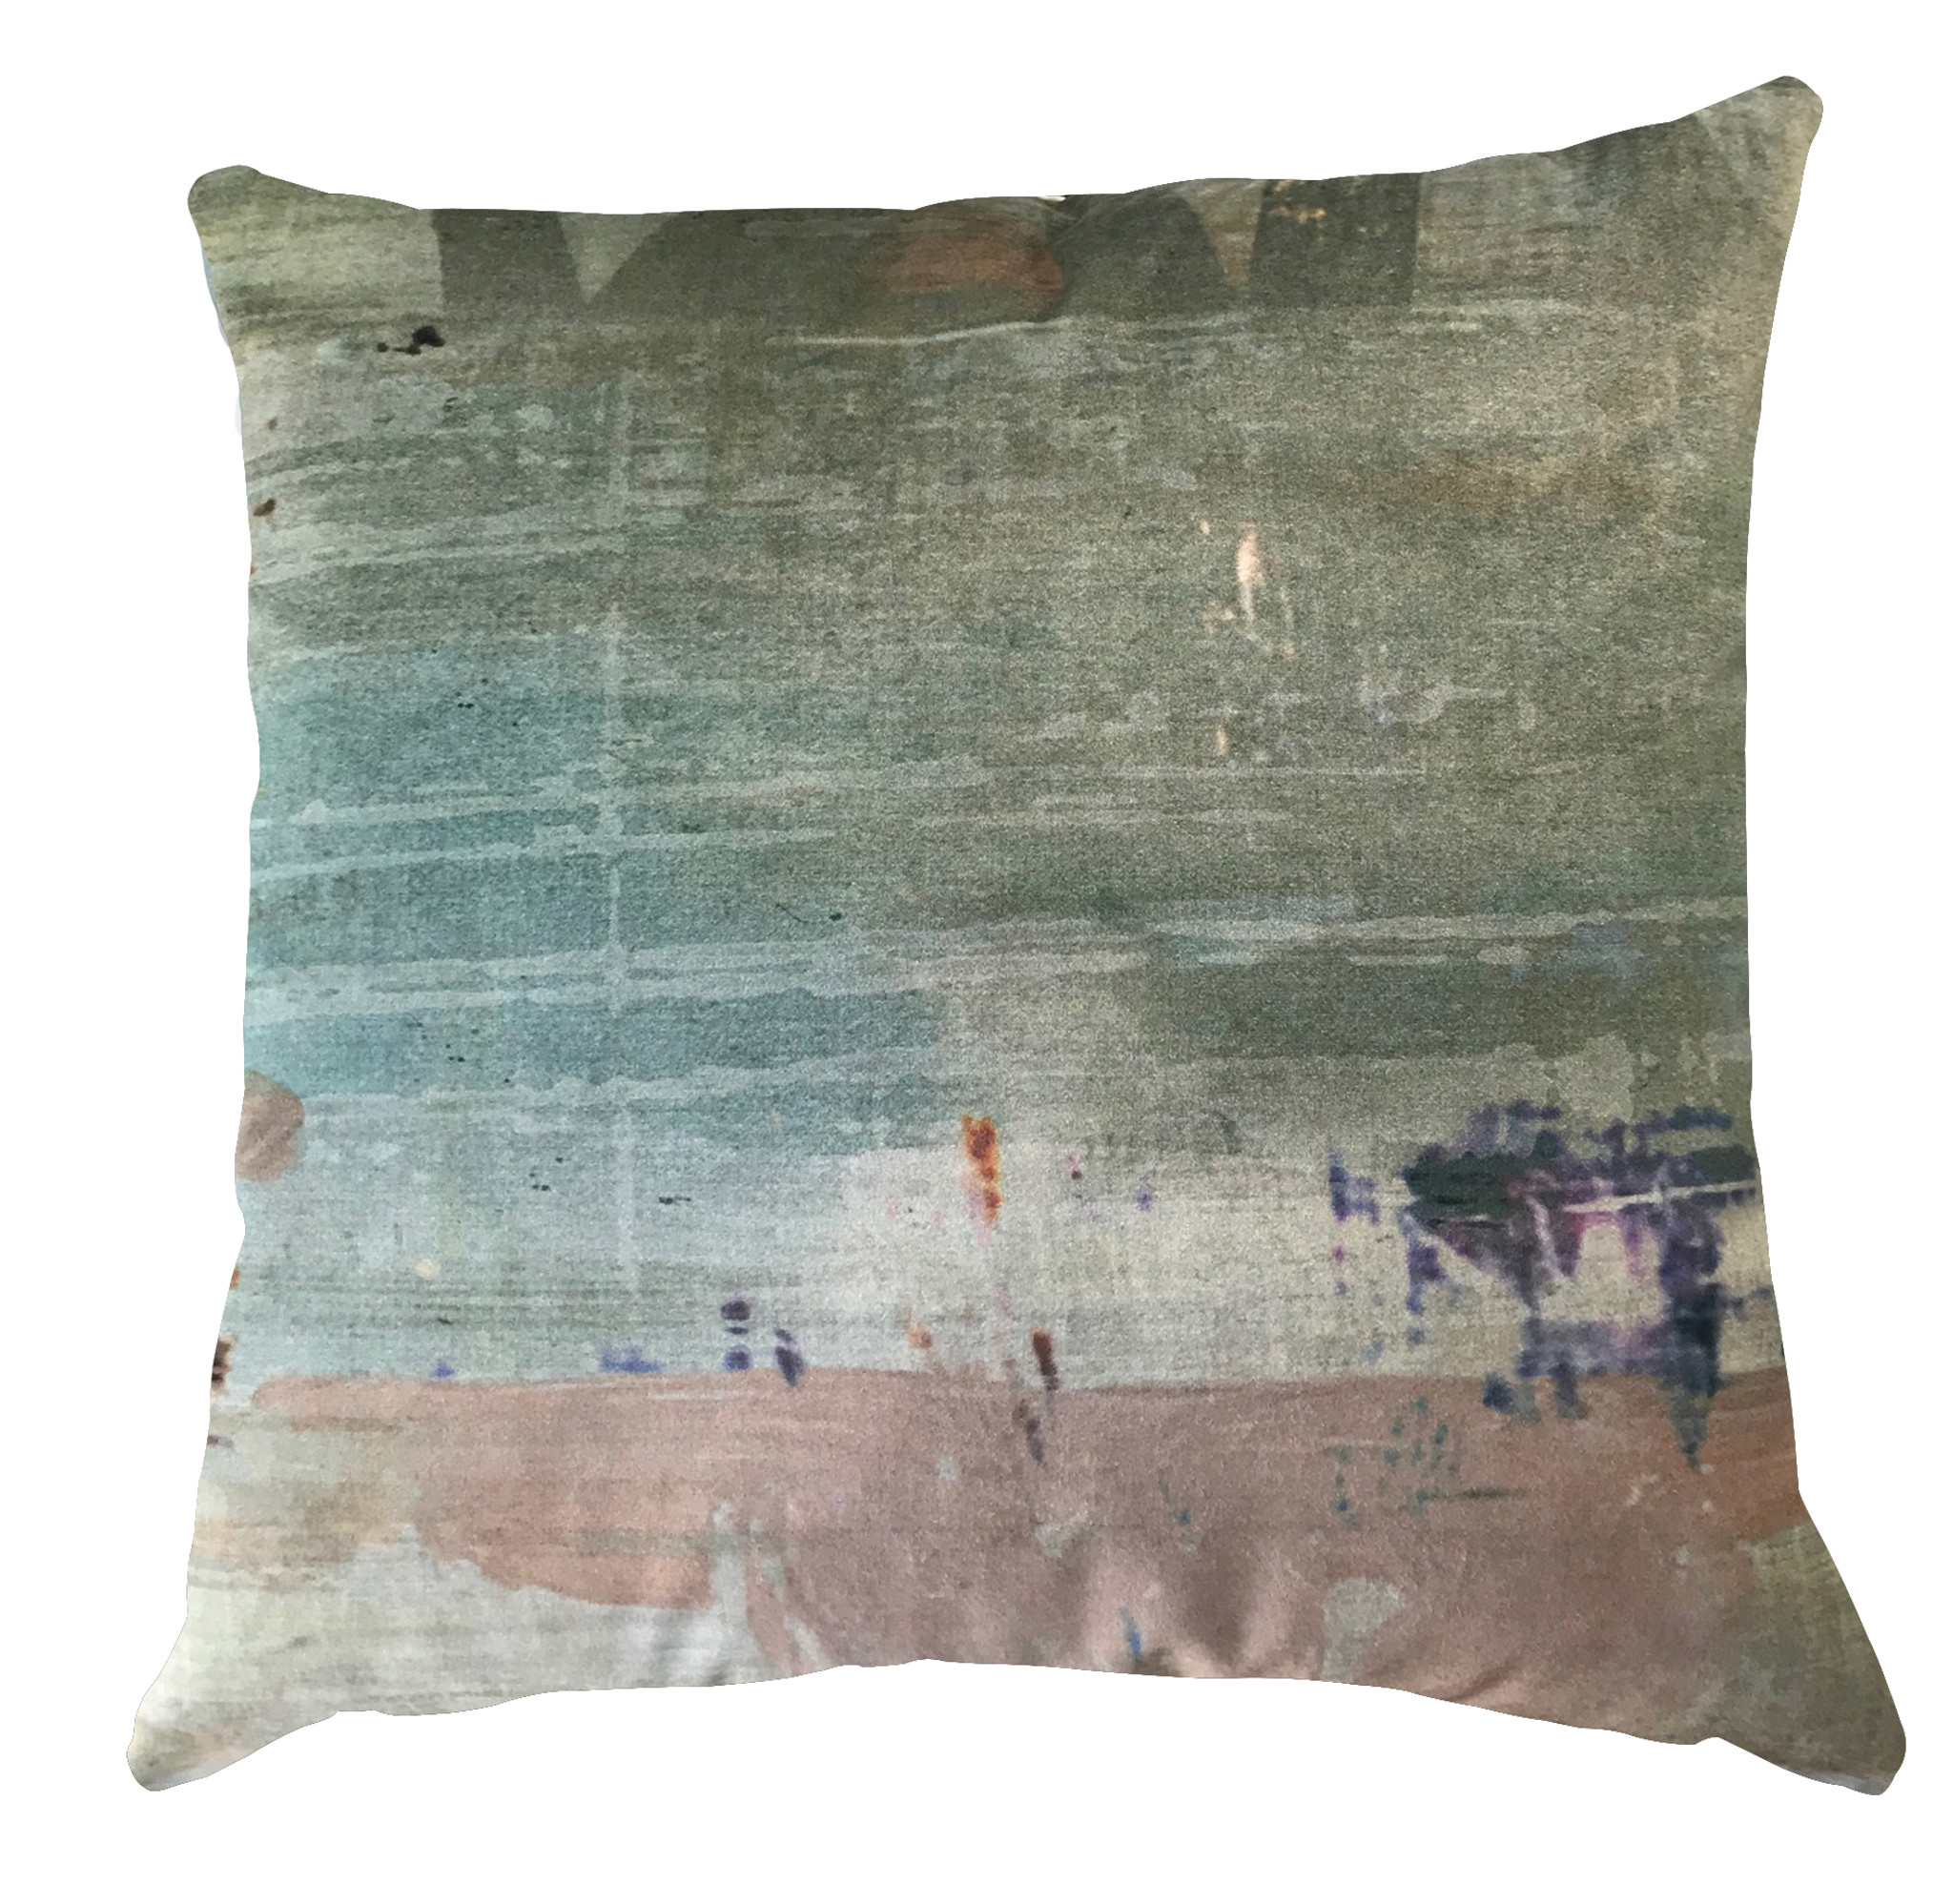  Cushion Cover - Abstract Landscape - Sunrise